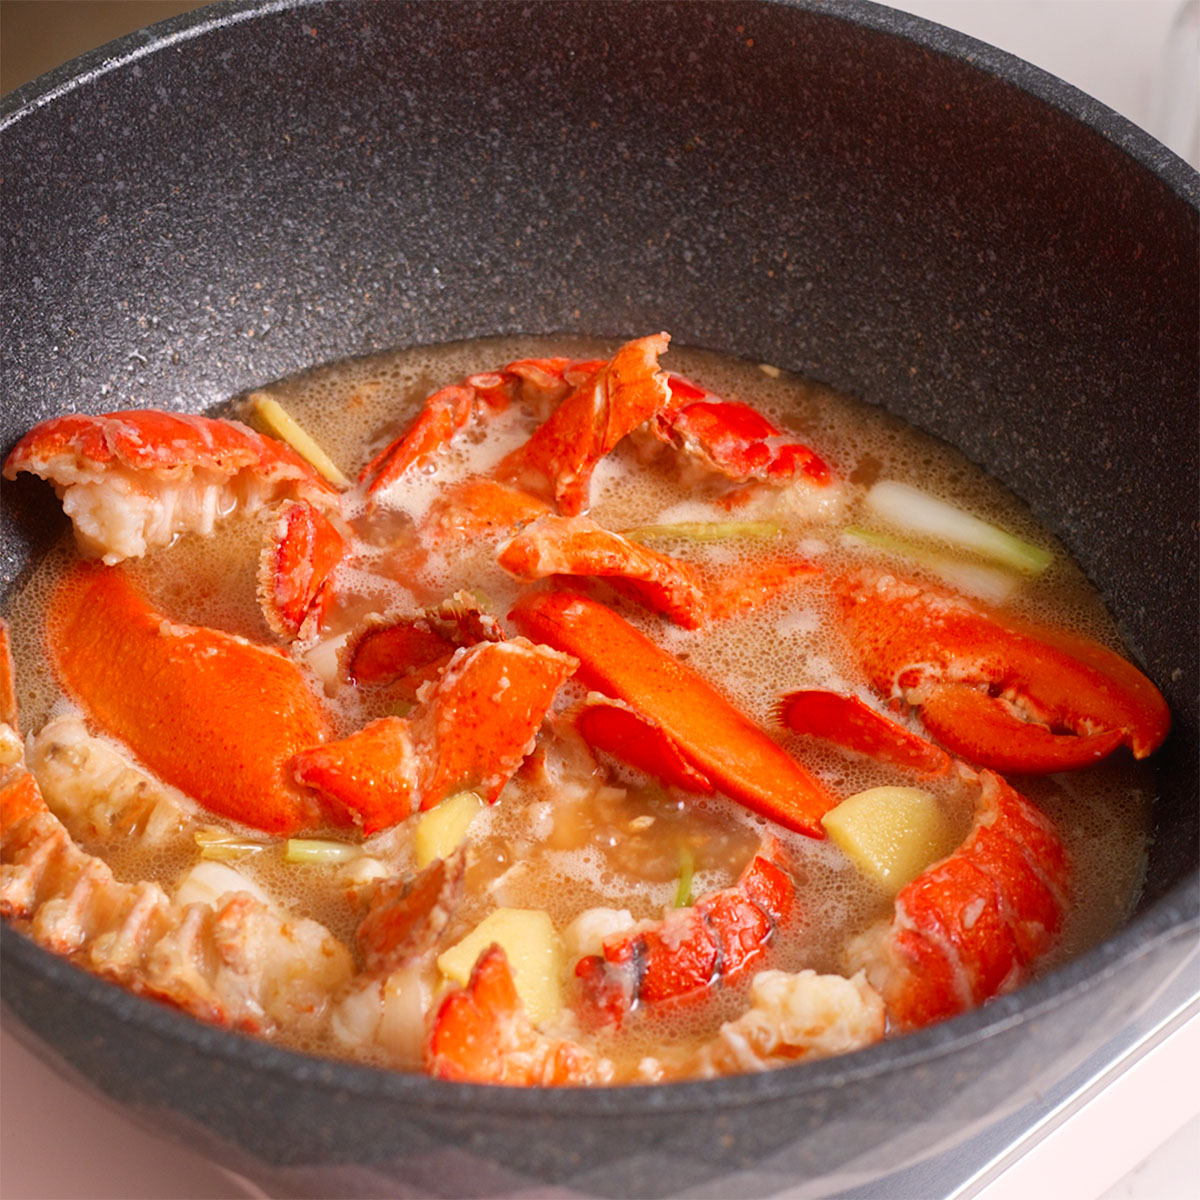 Fried lobster and aromatics cooking in a sauce.